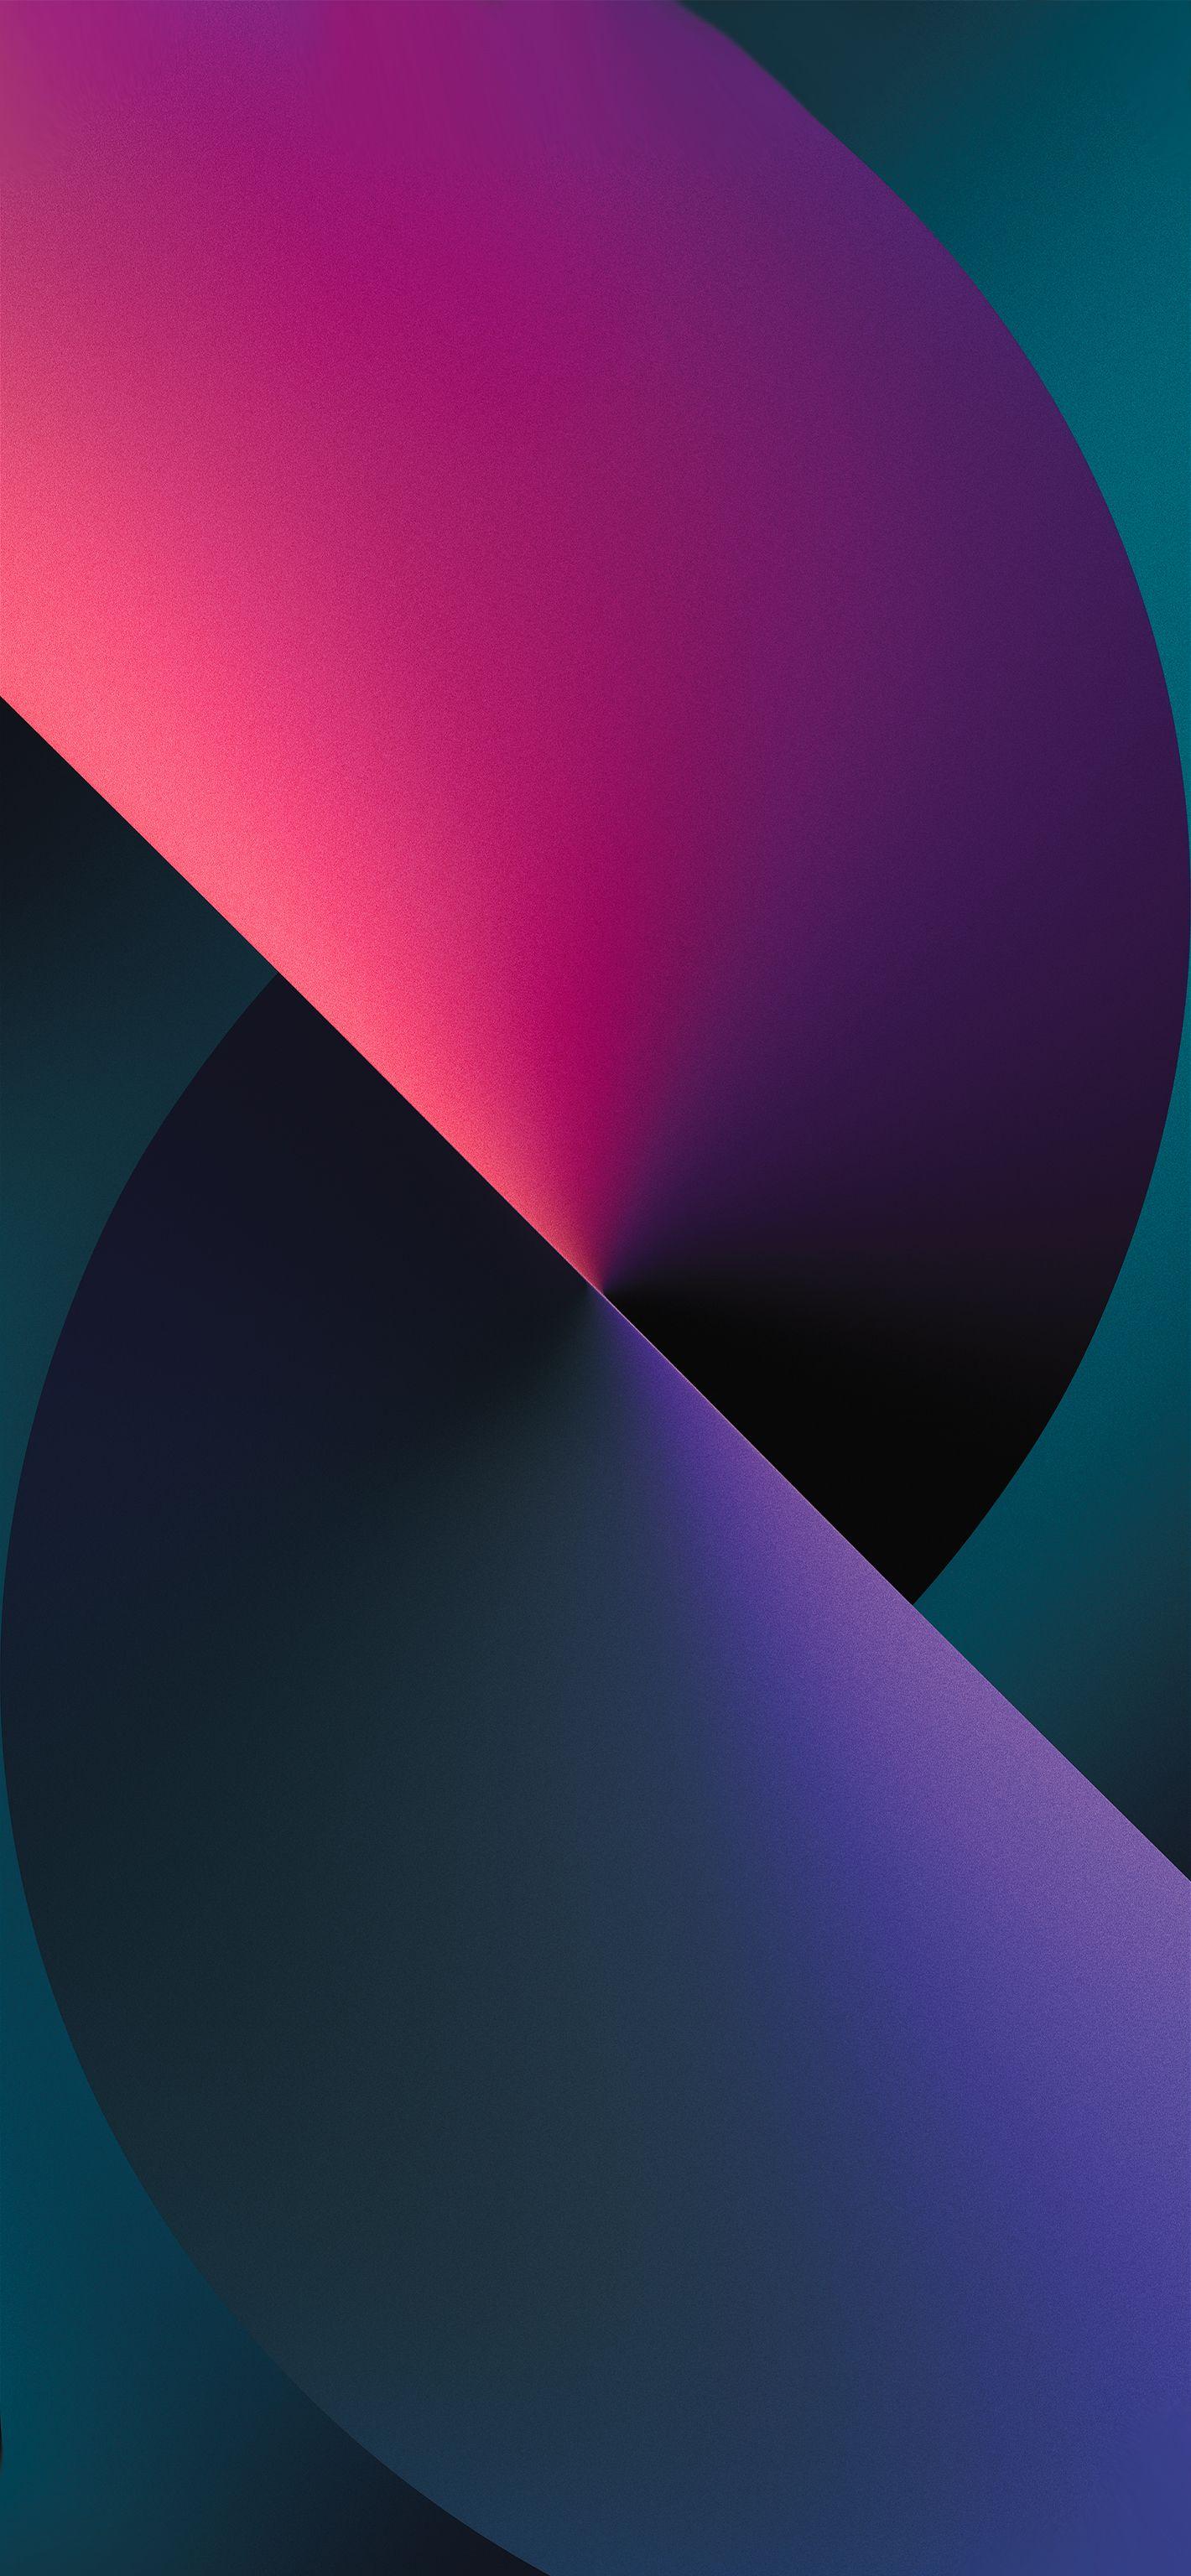 Stunning iPhone Stock Wallpaper In High Resolution